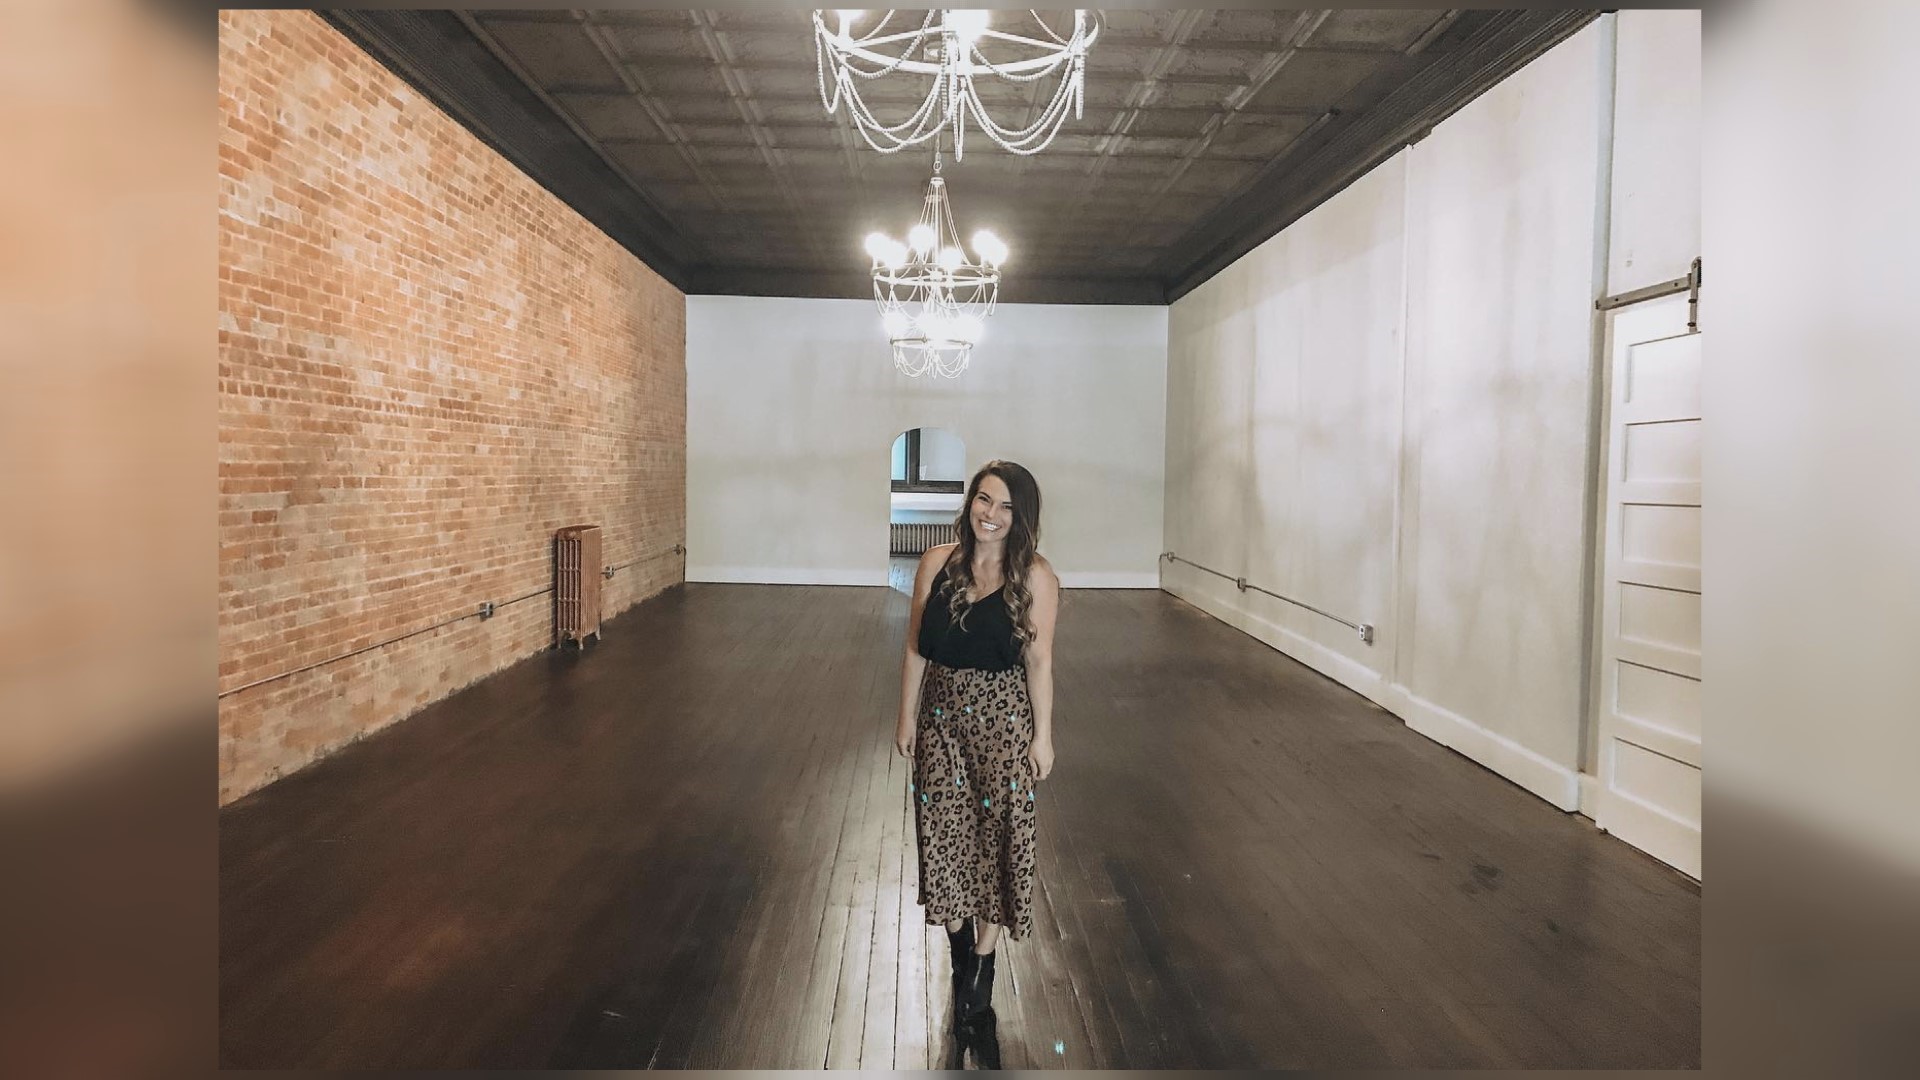 Chelsea Lonsway has run her business online for 4 years, but says now she is ready to take the next step into a physical location, right back home.